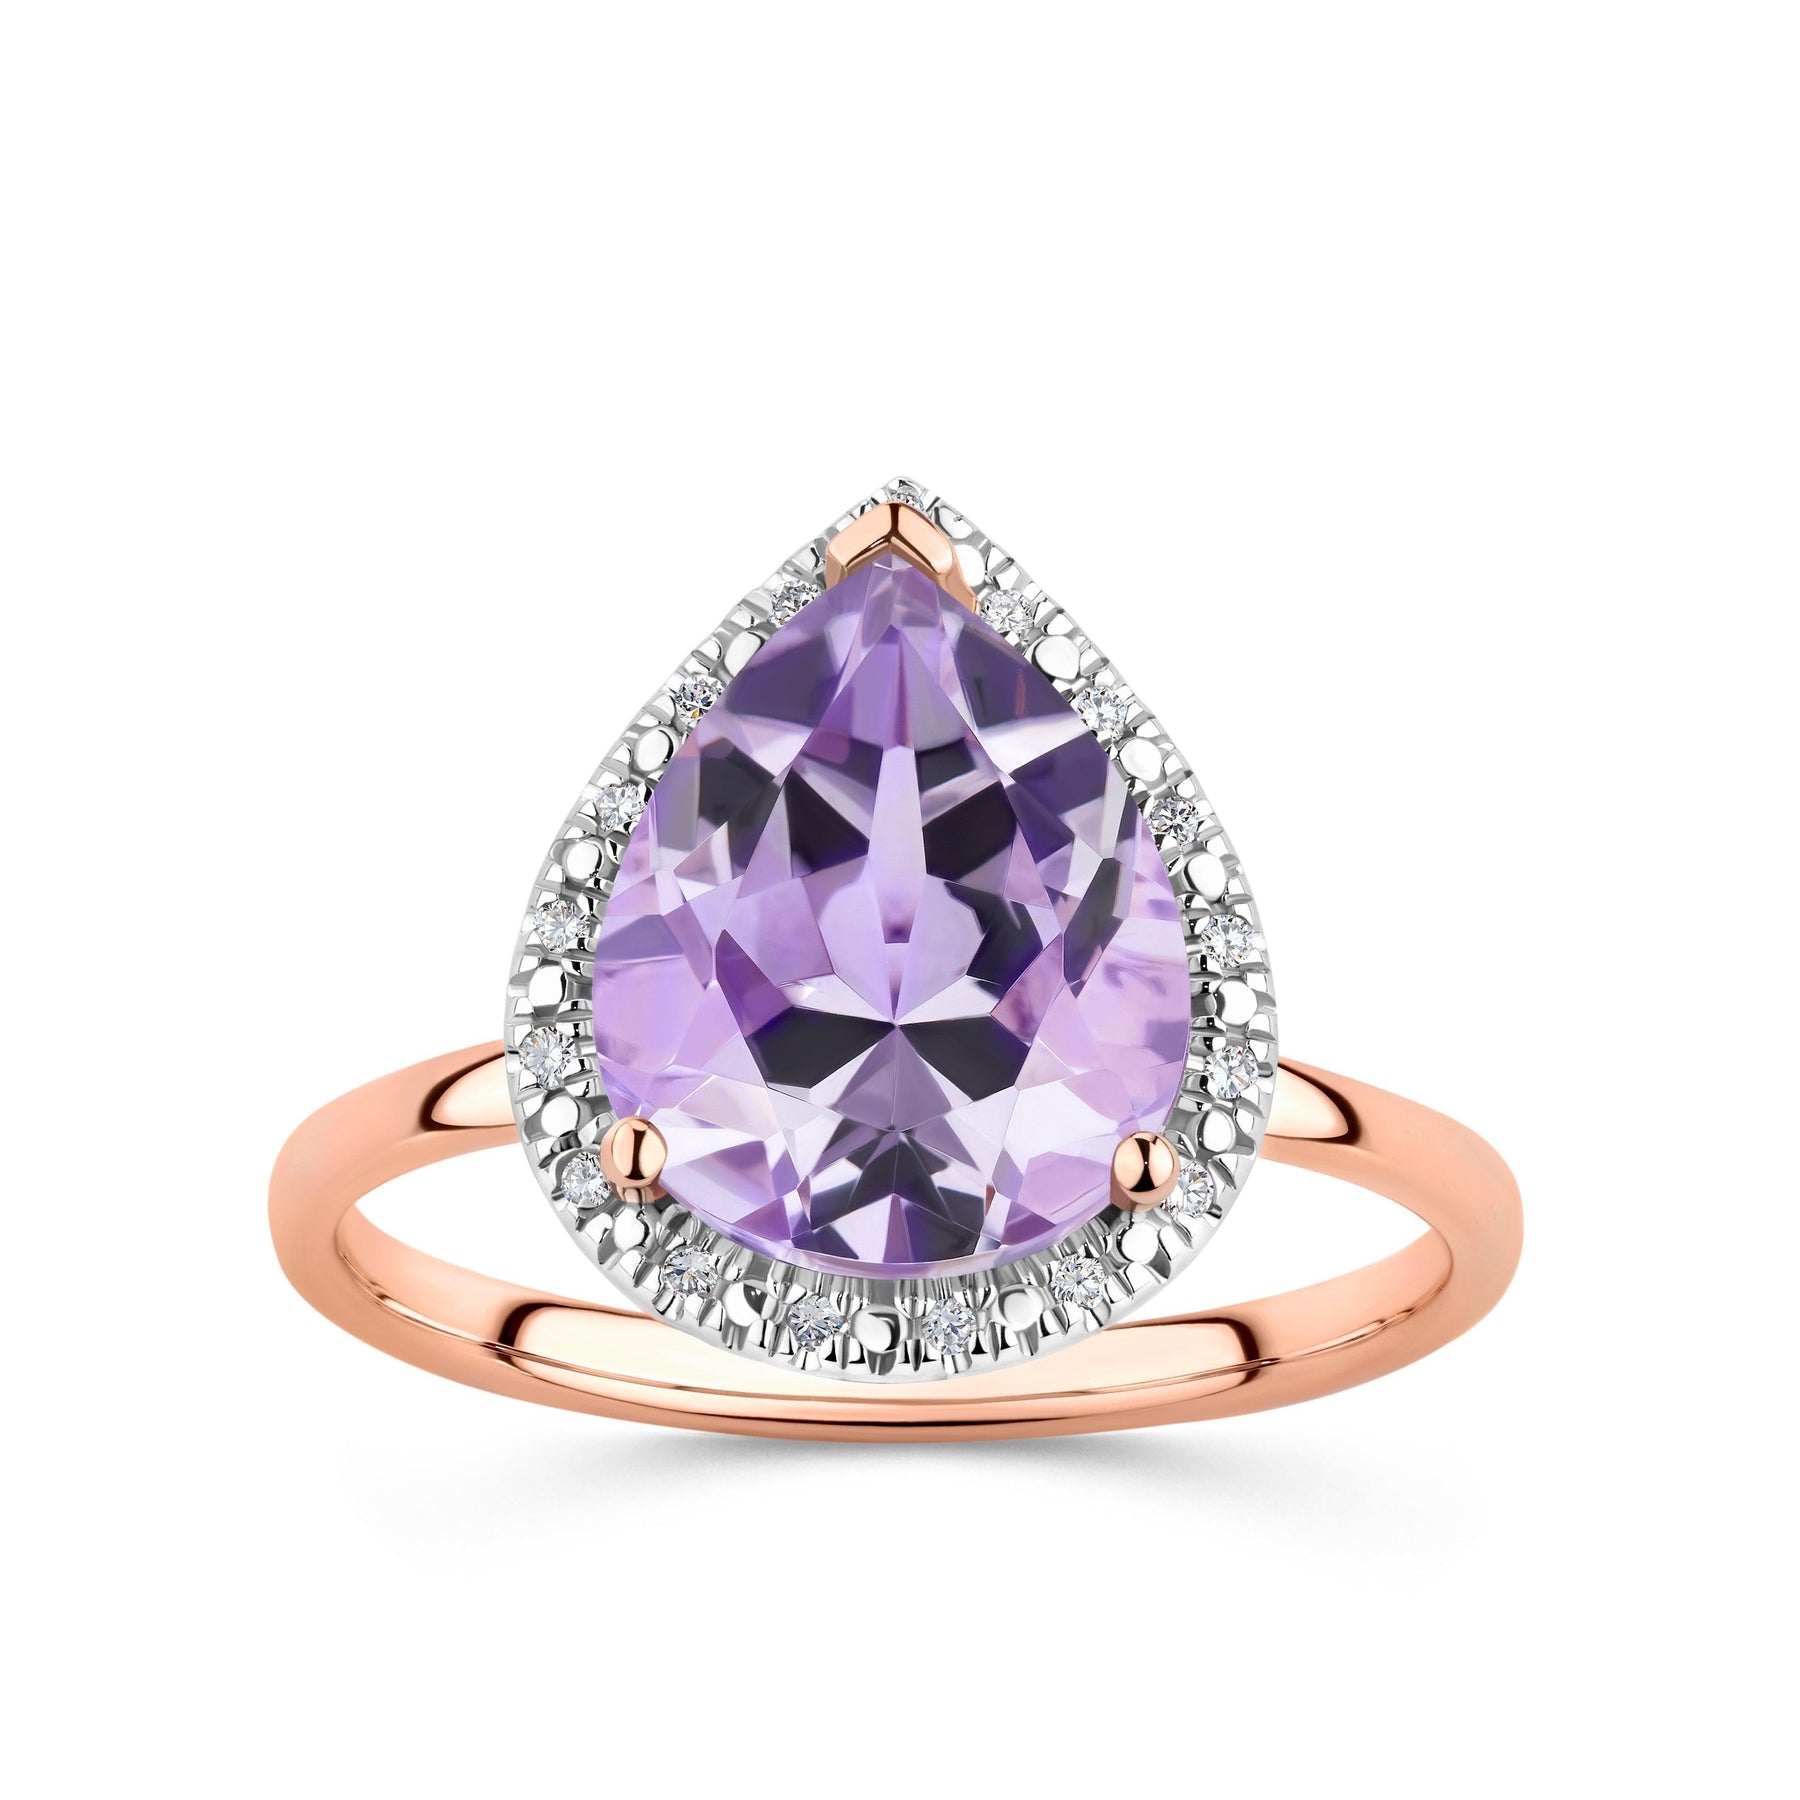 Pear Cut Amethyst & Diamond Cocktail Ring in 9ct Rose Gold - Wallace Bishop